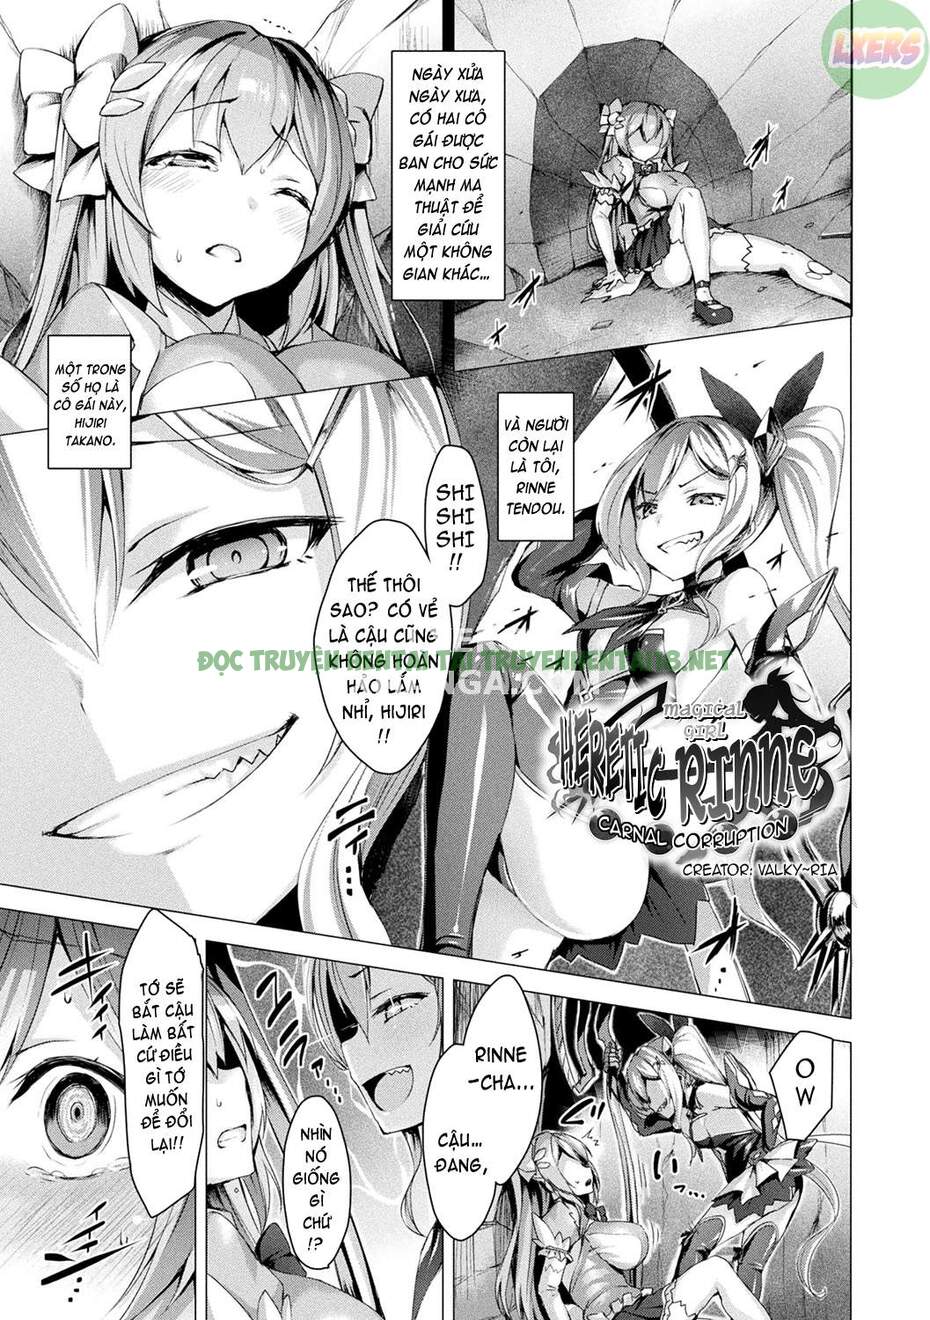 Xem ảnh The Archangel Of Love, Love Mary - Chapter 6 END - 5 - Hentai24h.Tv